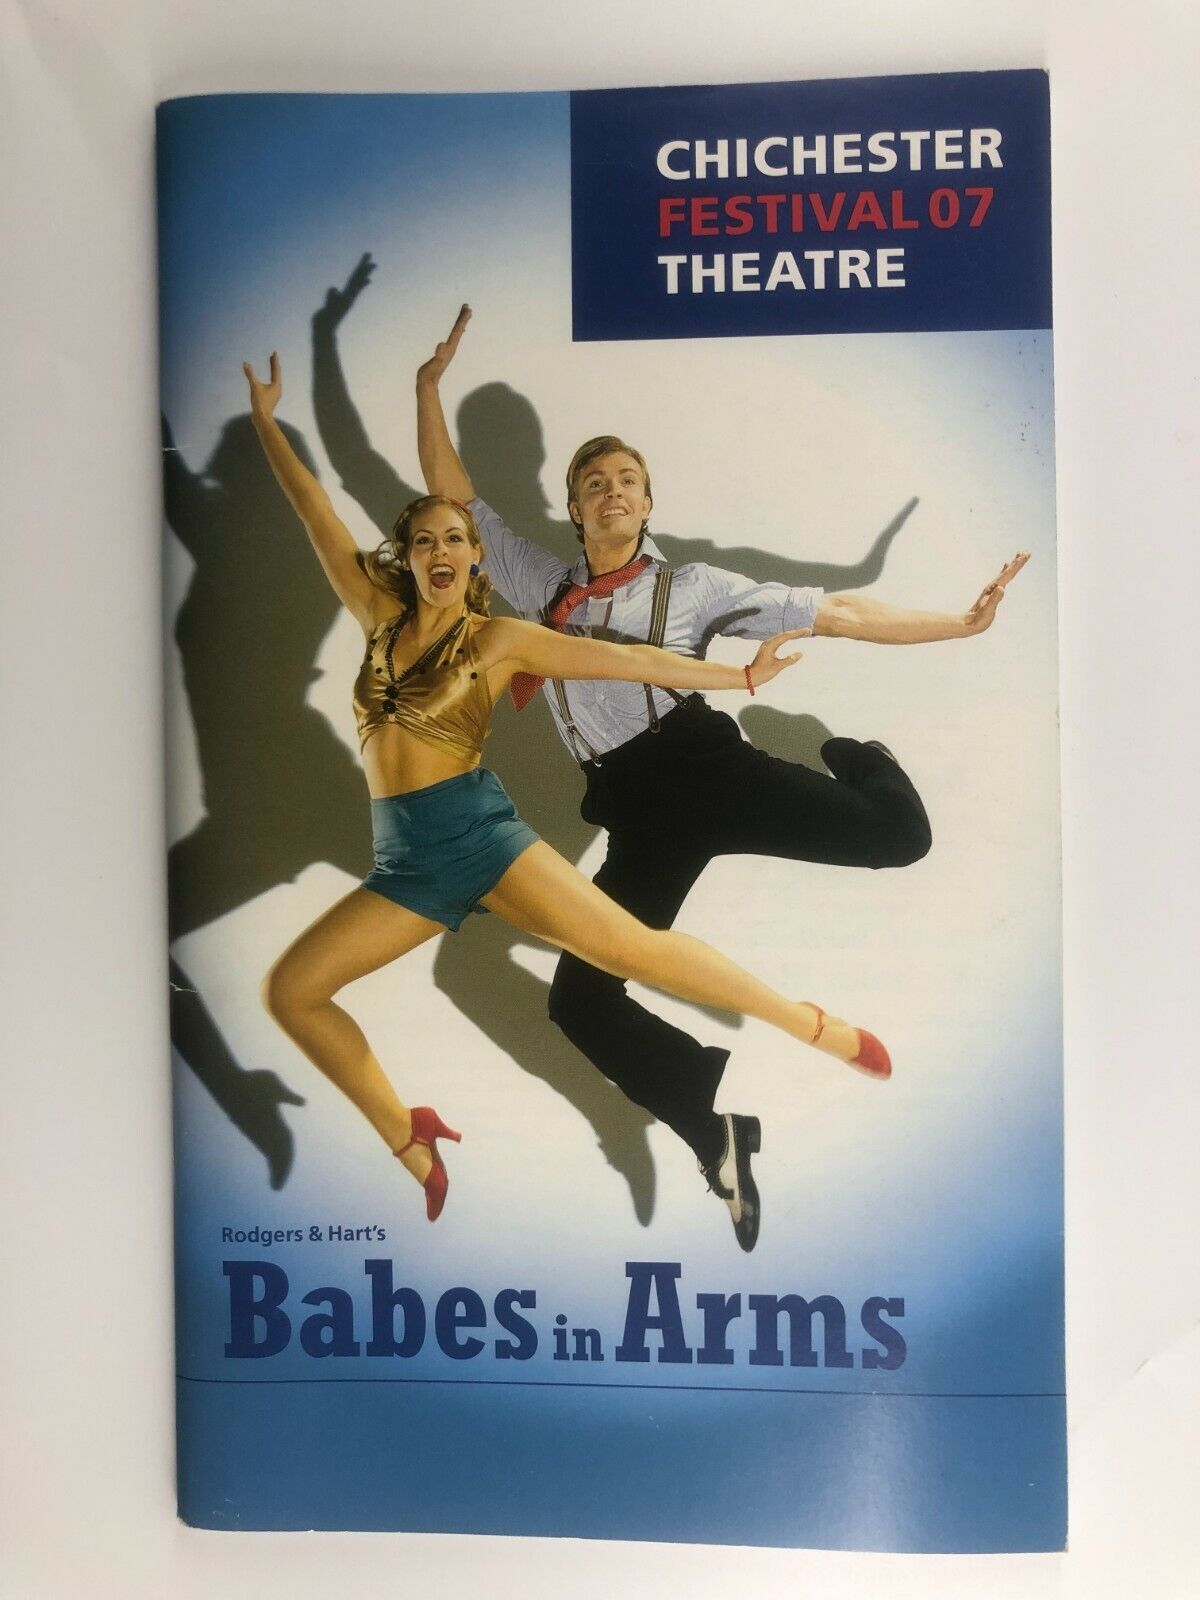 Chichester Festival Theatre 2007 Babes In Arms +2 tickets